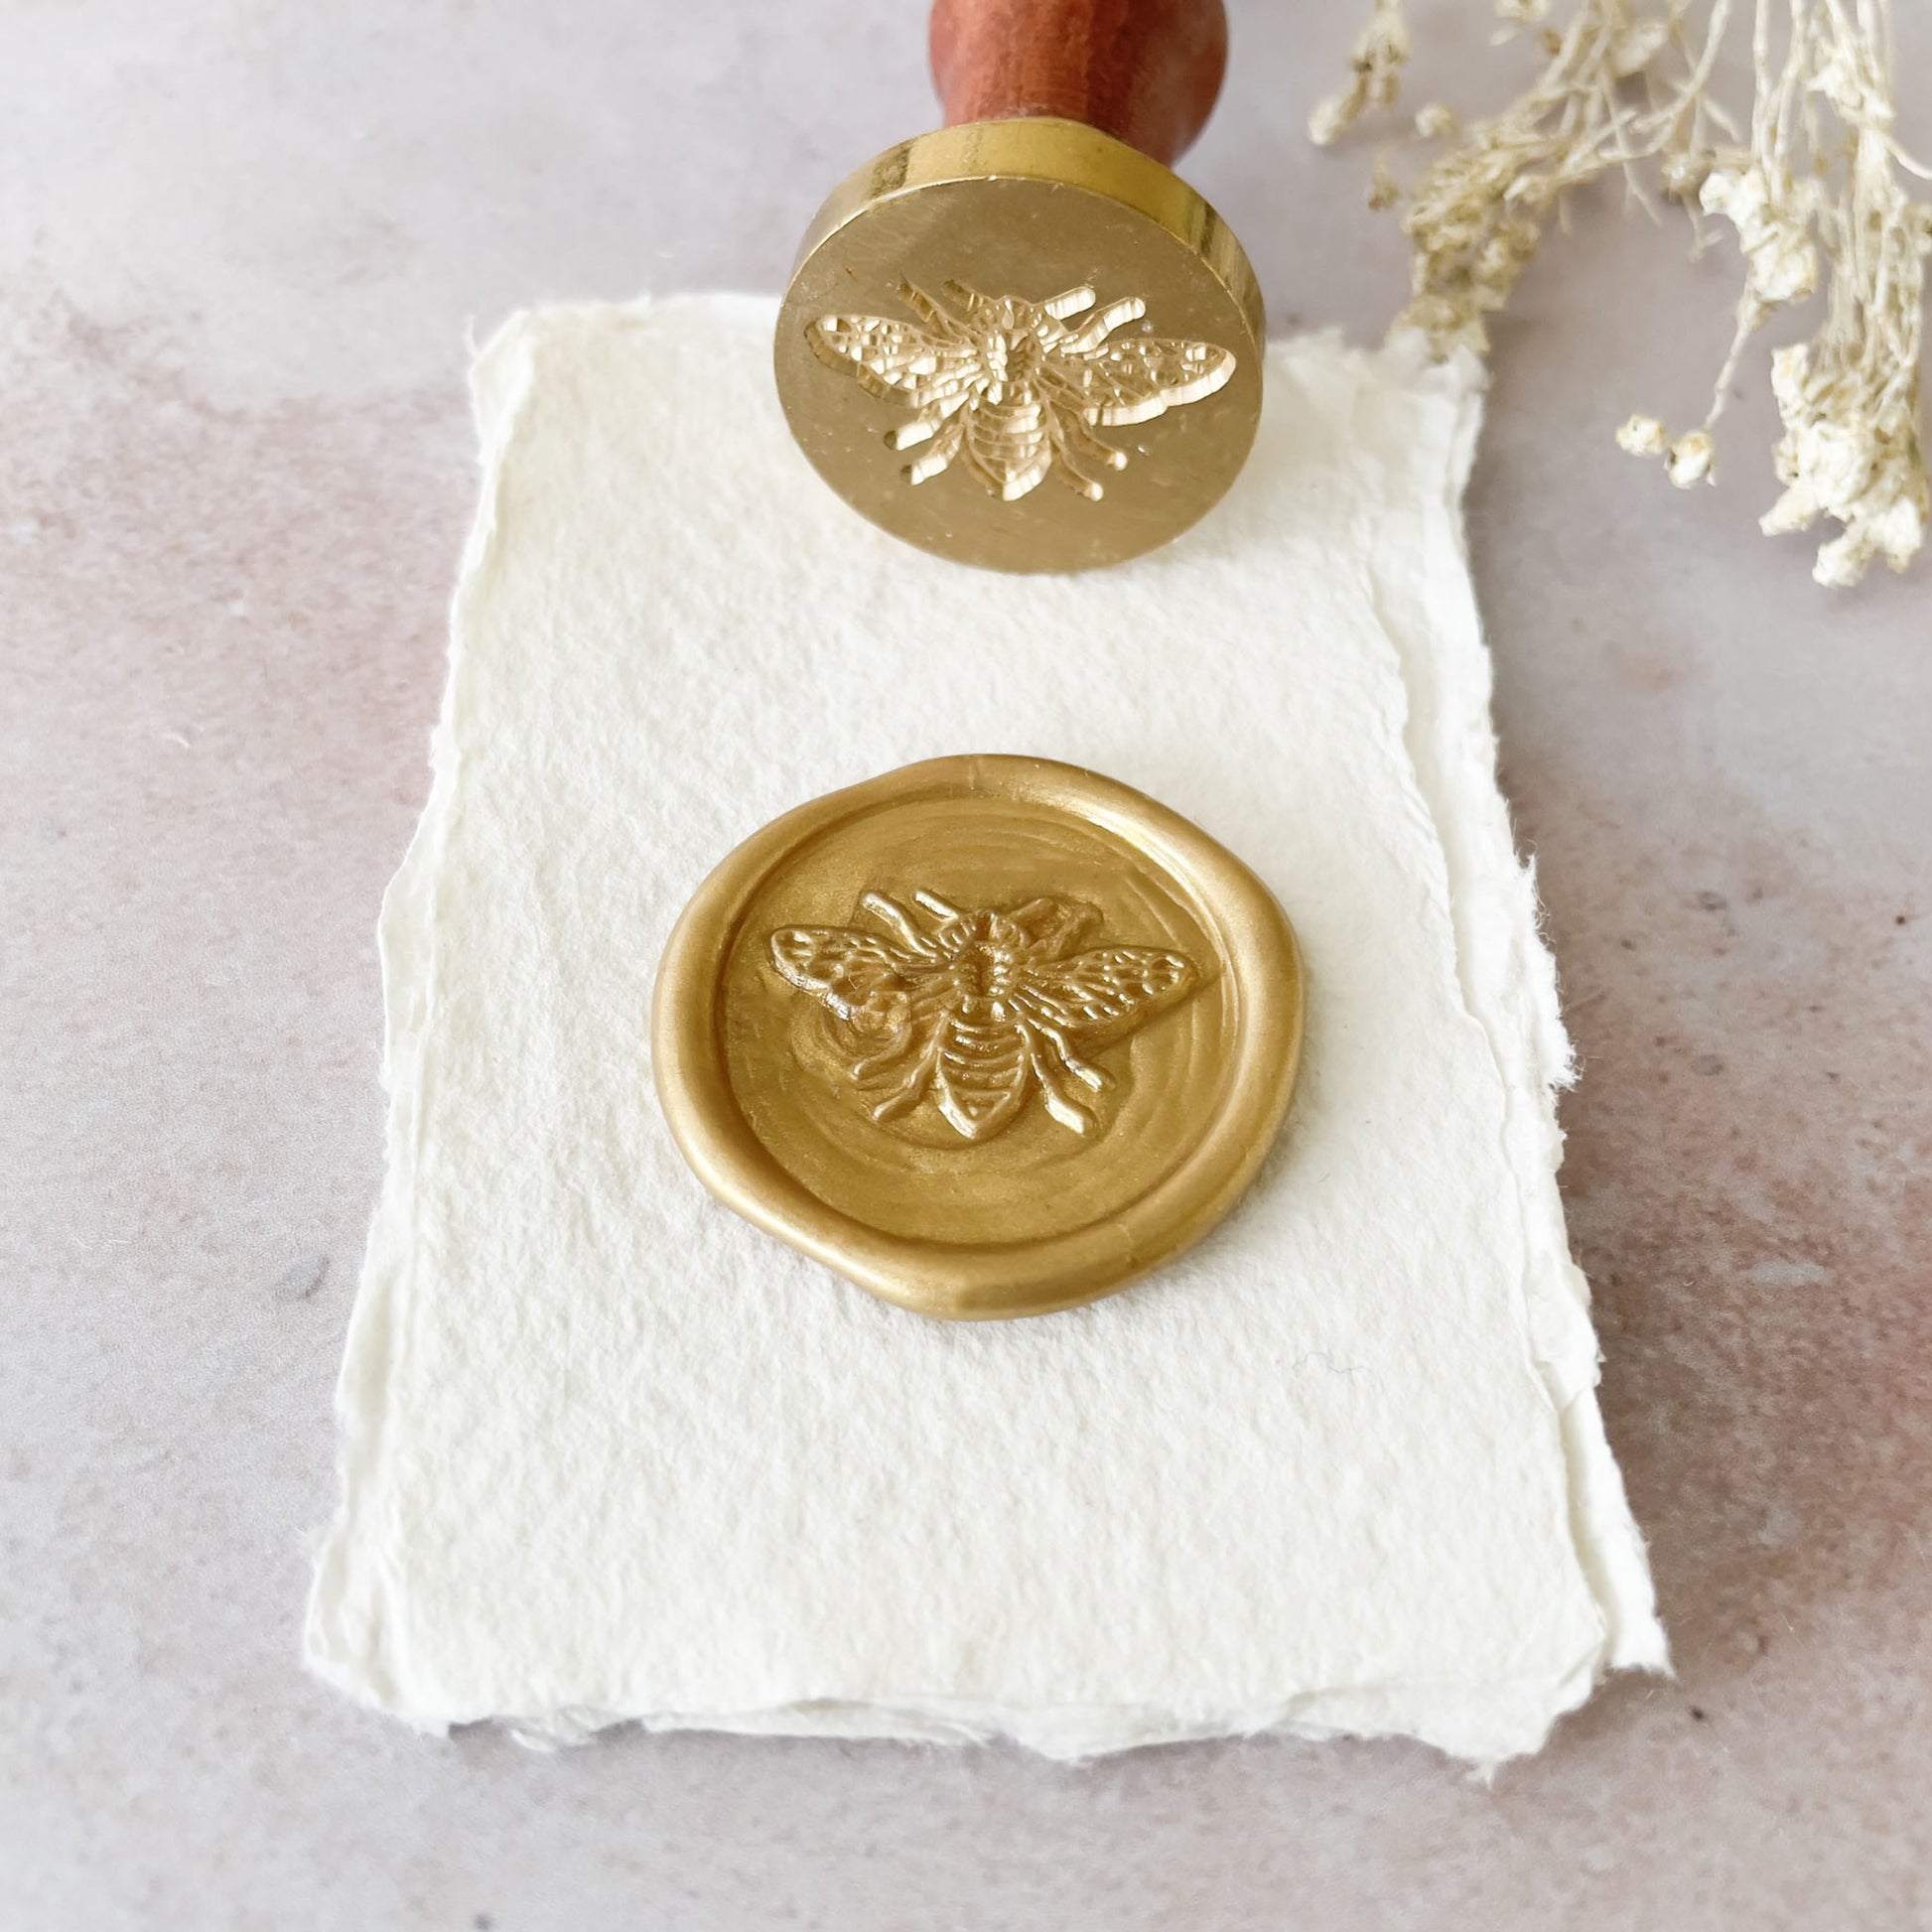 Ready Made Wax Seal Stamp - Customizable Bee Wax Seal Stamp